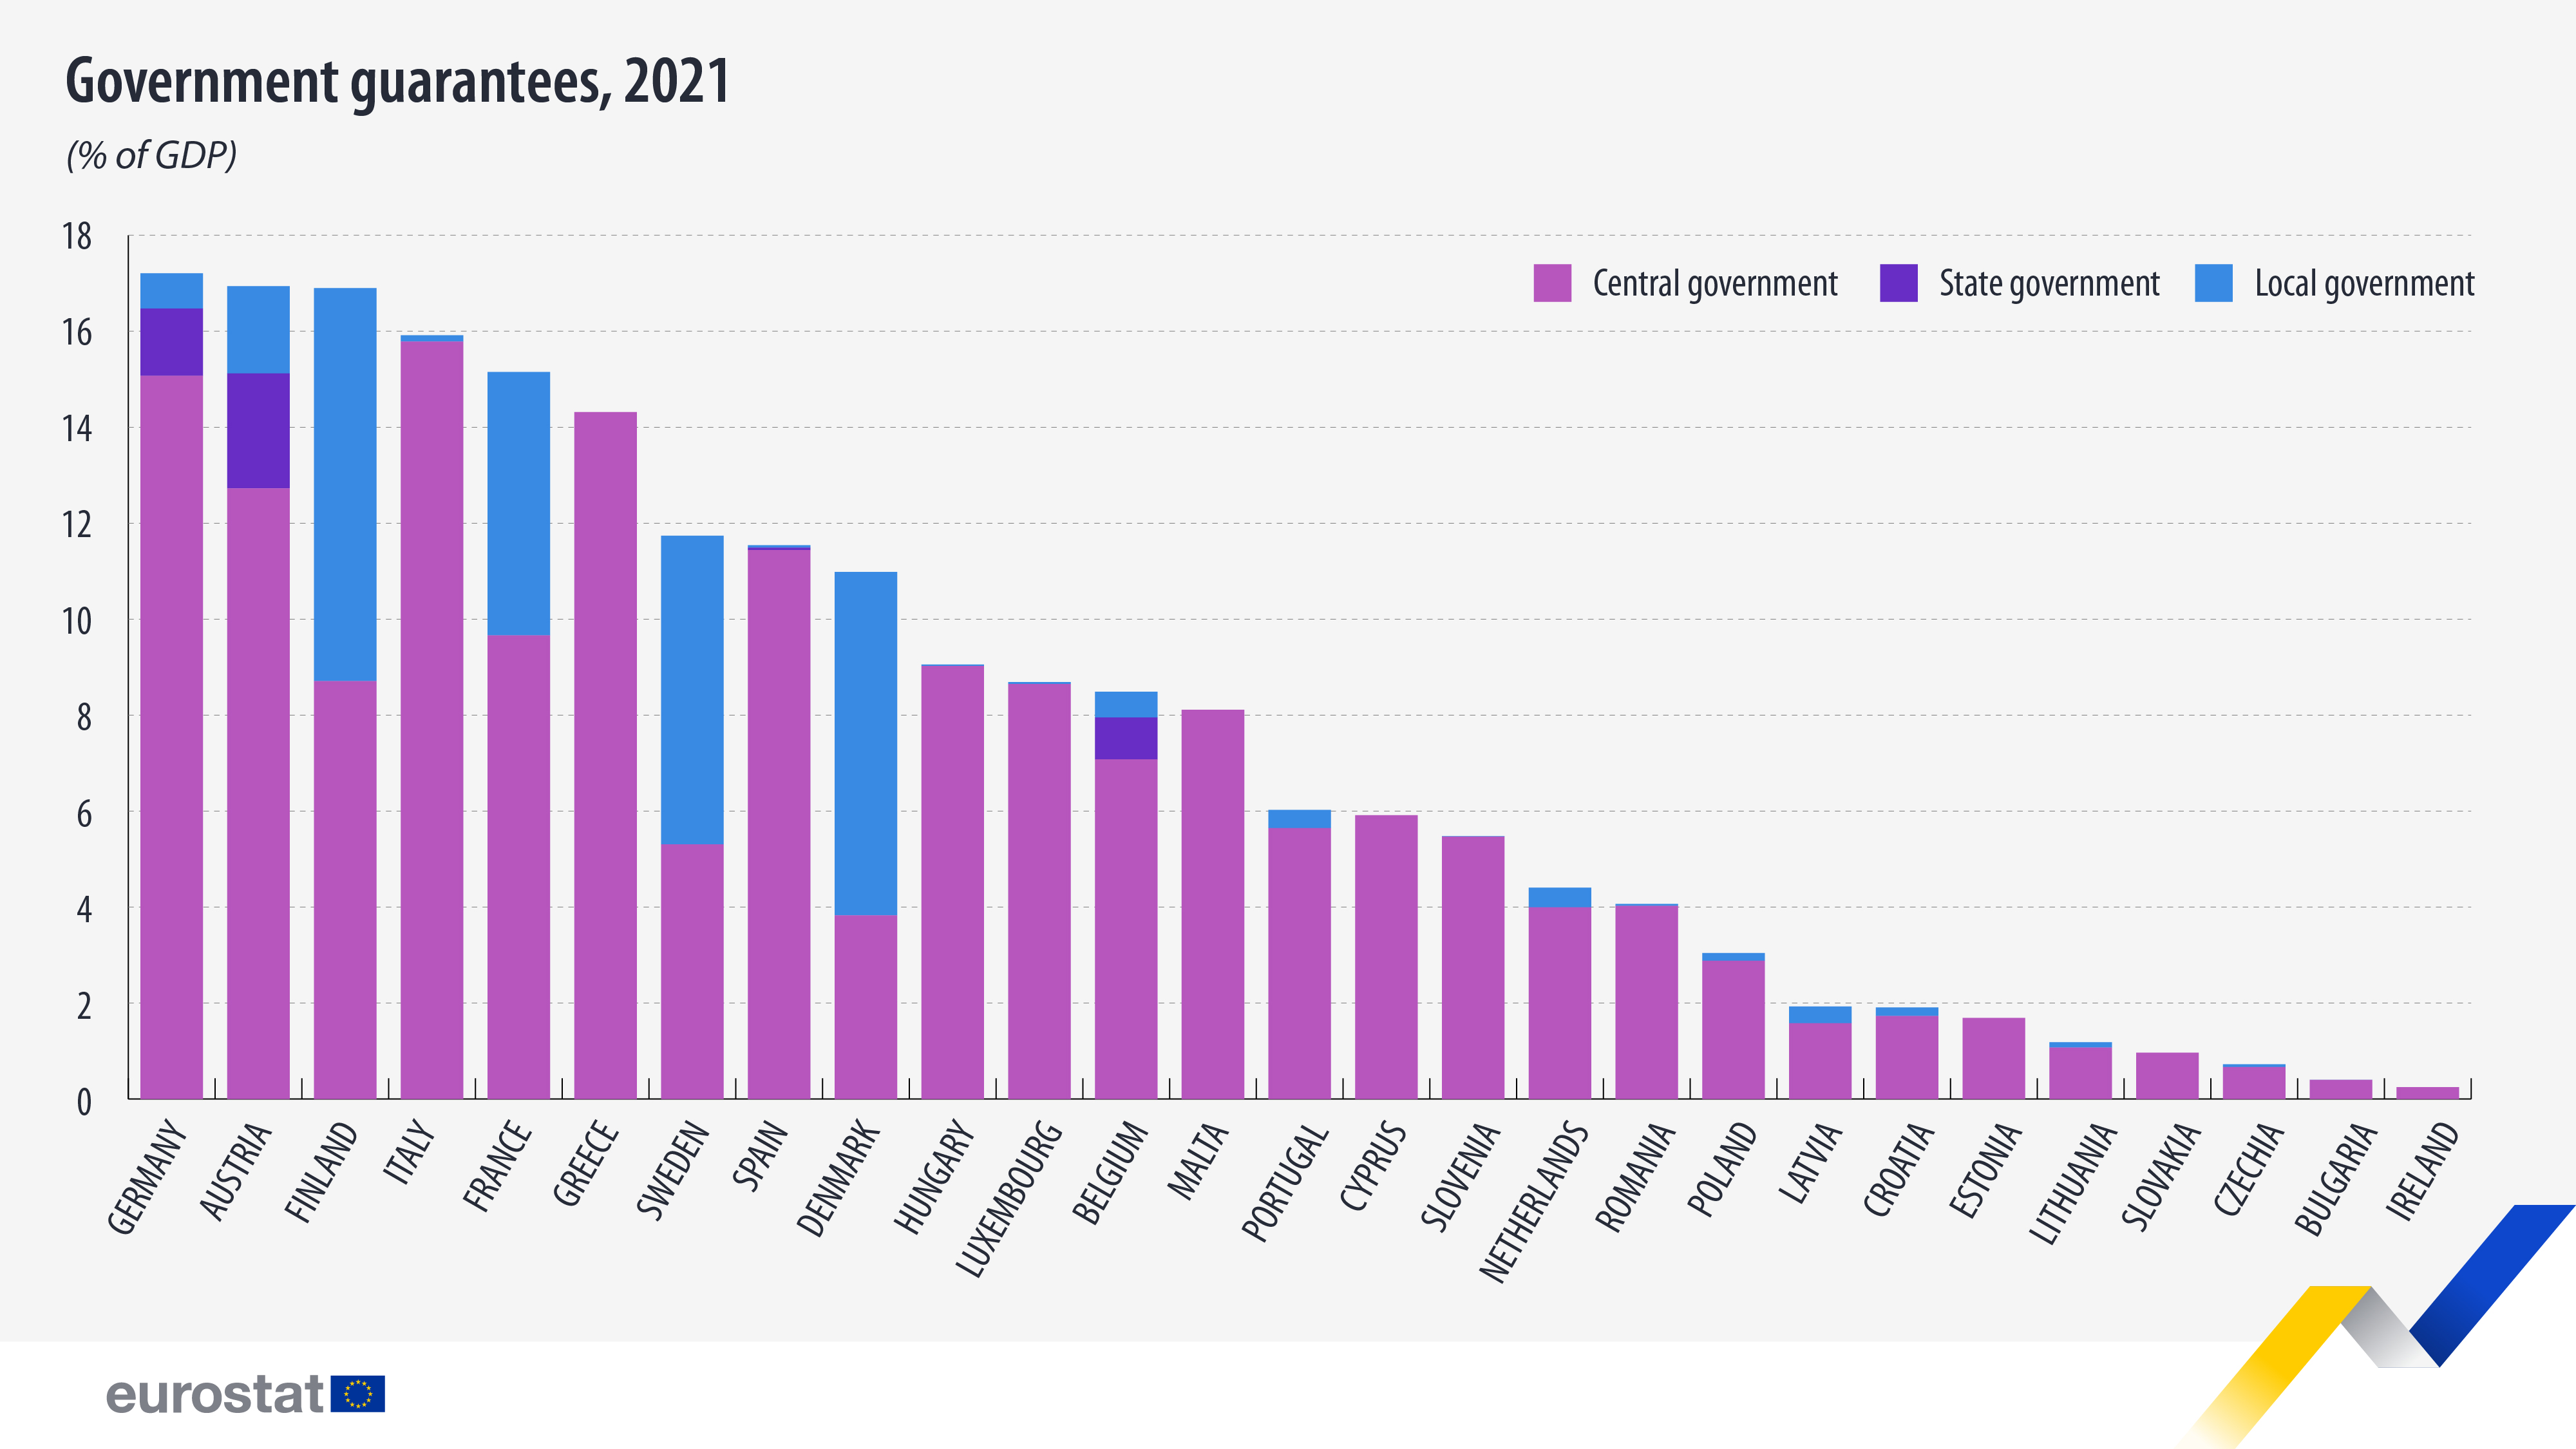 Stacked bar graph: government guarantees in 2021 as a % of GDP in the EU Member States